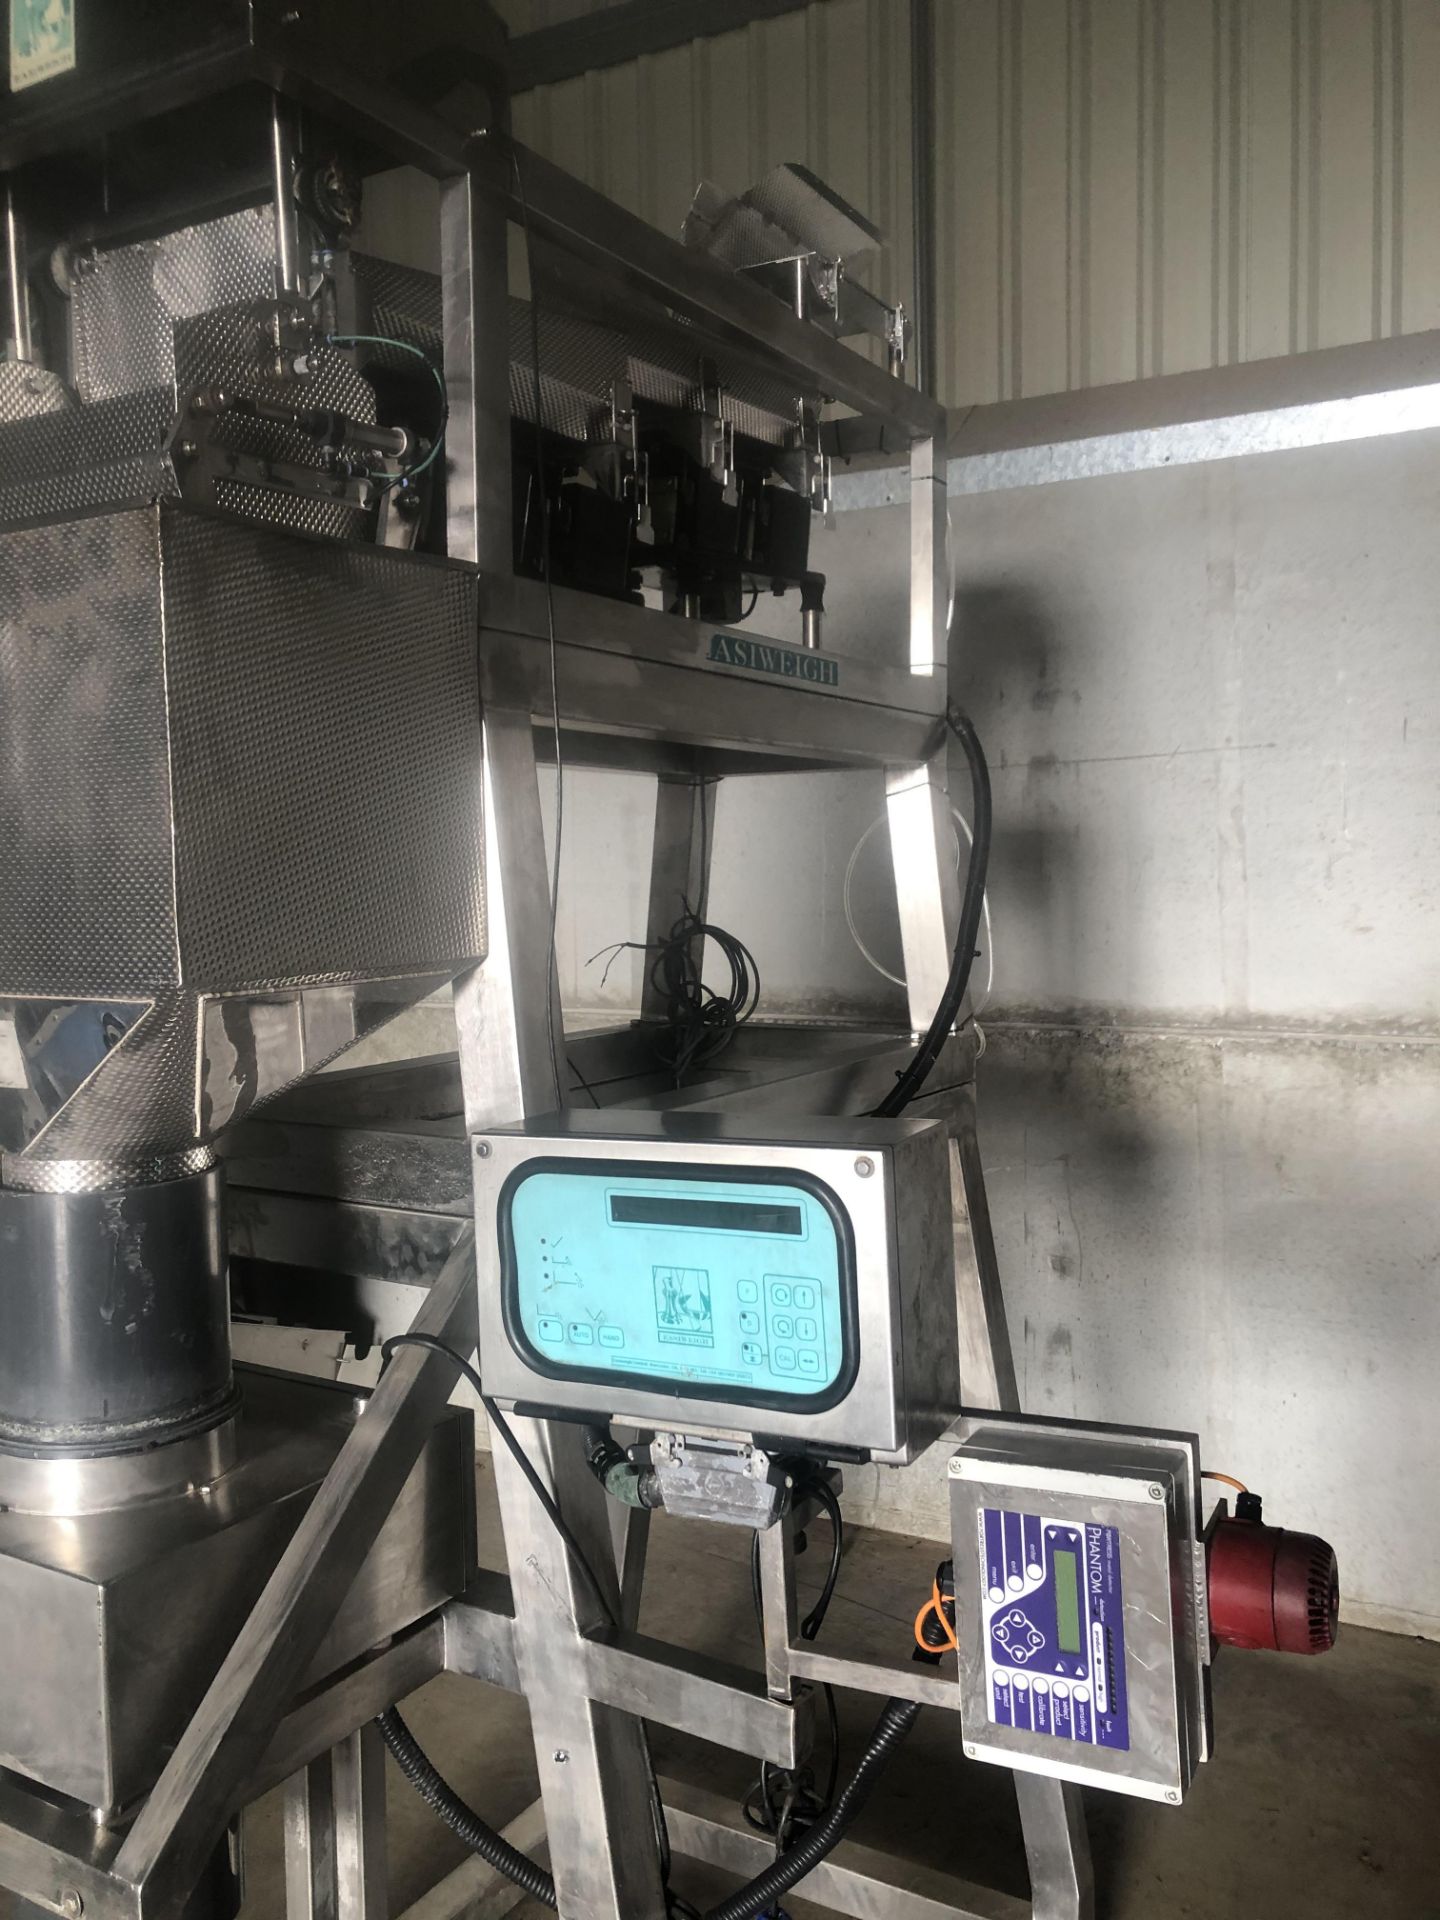 Easiweigh weigher - Image 2 of 5